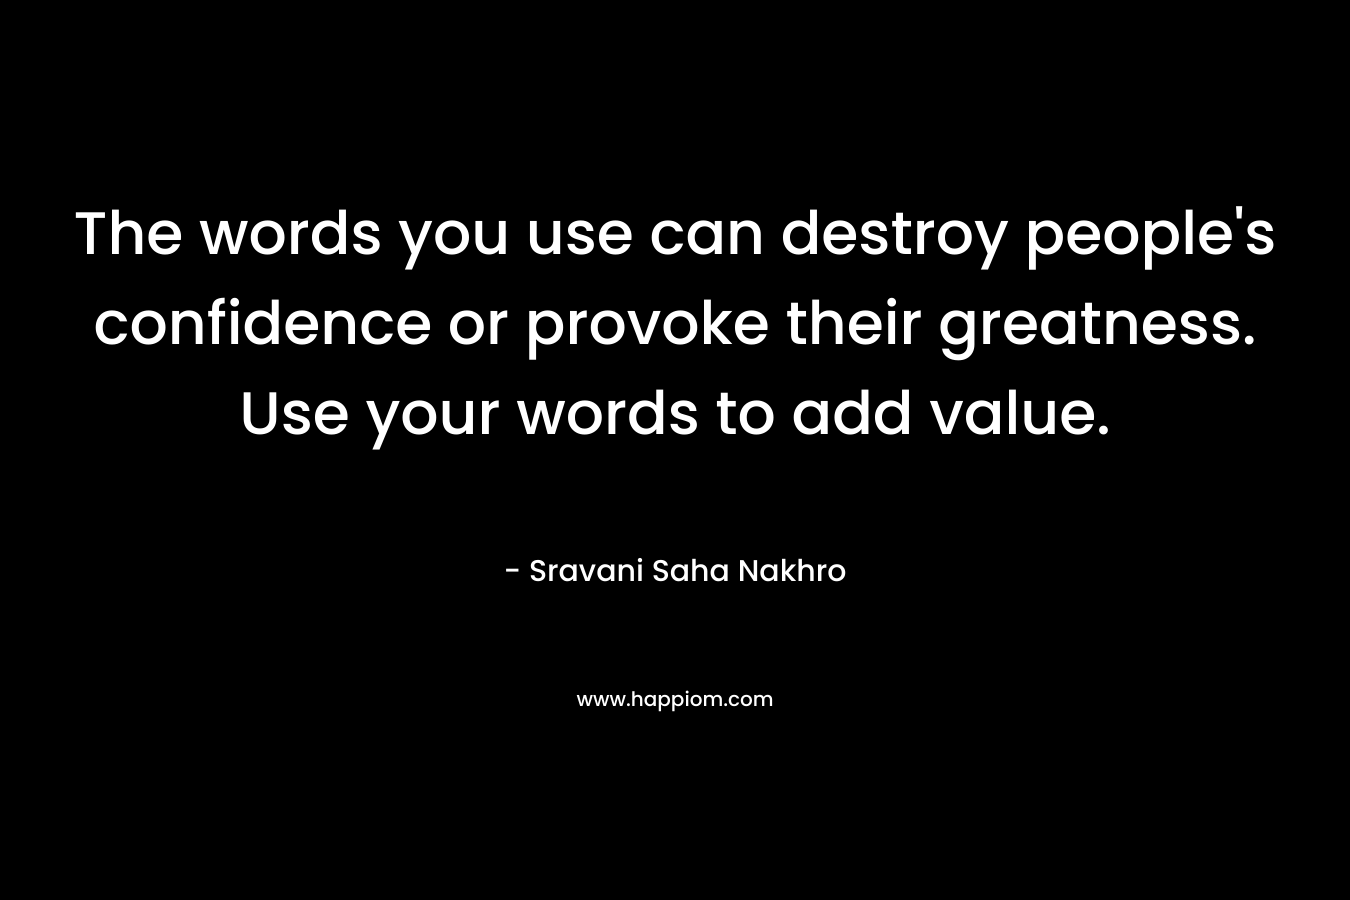 The words you use can destroy people's confidence or provoke their greatness. Use your words to add value.